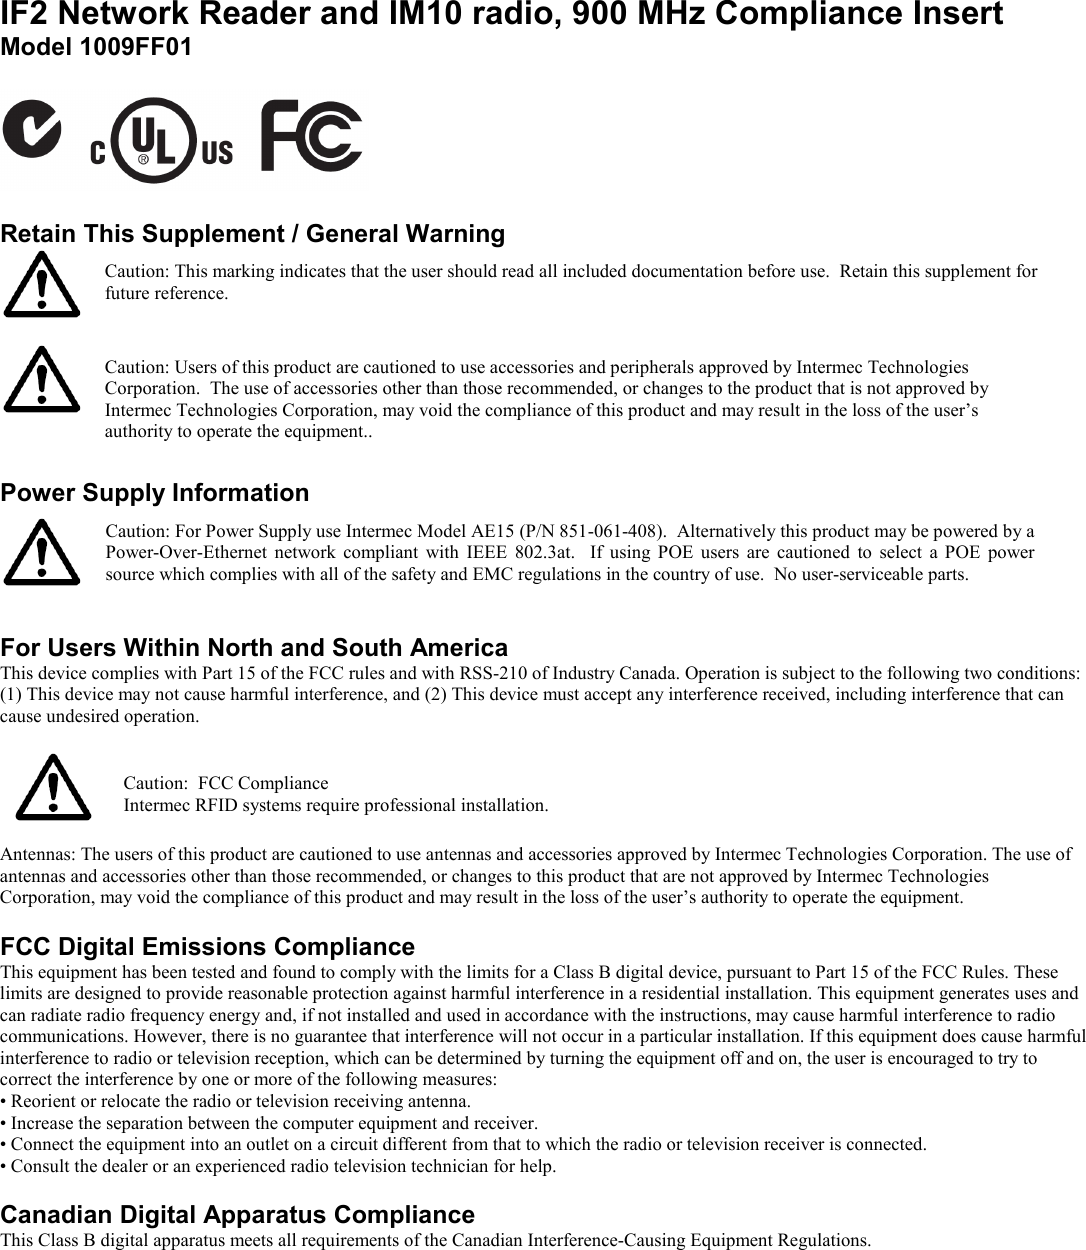 IF2 Network Reader and IM10 radio, 900 MHz Compliance Insert  Model 1009FF01    Retain This Supplement / General Warning   Caution: This marking indicates that the user should read all included documentation before use.  Retain this supplement for future reference.   Caution: Users of this product are cautioned to use accessories and peripherals approved by Intermec Technologies Corporation.  The use of accessories other than those recommended, or changes to the product that is not approved by Intermec Technologies Corporation, may void the compliance of this product and may result in the loss of the user’s authority to operate the equipment..  Power Supply Information   Caution: For Power Supply use Intermec Model AE15 (P/N 851-061-408).  Alternatively this product may be powered by a Power-Over-Ethernet  network  compliant  with  IEEE  802.3at.    If  using  POE  users  are  cautioned  to  select  a POE  power source which complies with all of the safety and EMC regulations in the country of use.  No user-serviceable parts.  For Users Within North and South America This device complies with Part 15 of the FCC rules and with RSS-210 of Industry Canada. Operation is subject to the following two conditions: (1) This device may not cause harmful interference, and (2) This device must accept any interference received, including interference that can cause undesired operation.    Caution:  FCC Compliance Intermec RFID systems require professional installation.  Antennas: The users of this product are cautioned to use antennas and accessories approved by Intermec Technologies Corporation. The use of antennas and accessories other than those recommended, or changes to this product that are not approved by Intermec Technologies Corporation, may void the compliance of this product and may result in the loss of the user’s authority to operate the equipment.   FCC Digital Emissions Compliance This equipment has been tested and found to comply with the limits for a Class B digital device, pursuant to Part 15 of the FCC Rules. These limits are designed to provide reasonable protection against harmful interference in a residential installation. This equipment generates uses and can radiate radio frequency energy and, if not installed and used in accordance with the instructions, may cause harmful interference to radio communications. However, there is no guarantee that interference will not occur in a particular installation. If this equipment does cause harmful interference to radio or television reception, which can be determined by turning the equipment off and on, the user is encouraged to try to correct the interference by one or more of the following measures: • Reorient or relocate the radio or television receiving antenna. • Increase the separation between the computer equipment and receiver. • Connect the equipment into an outlet on a circuit different from that to which the radio or television receiver is connected. • Consult the dealer or an experienced radio television technician for help.  Canadian Digital Apparatus Compliance This Class B digital apparatus meets all requirements of the Canadian Interference-Causing Equipment Regulations.  